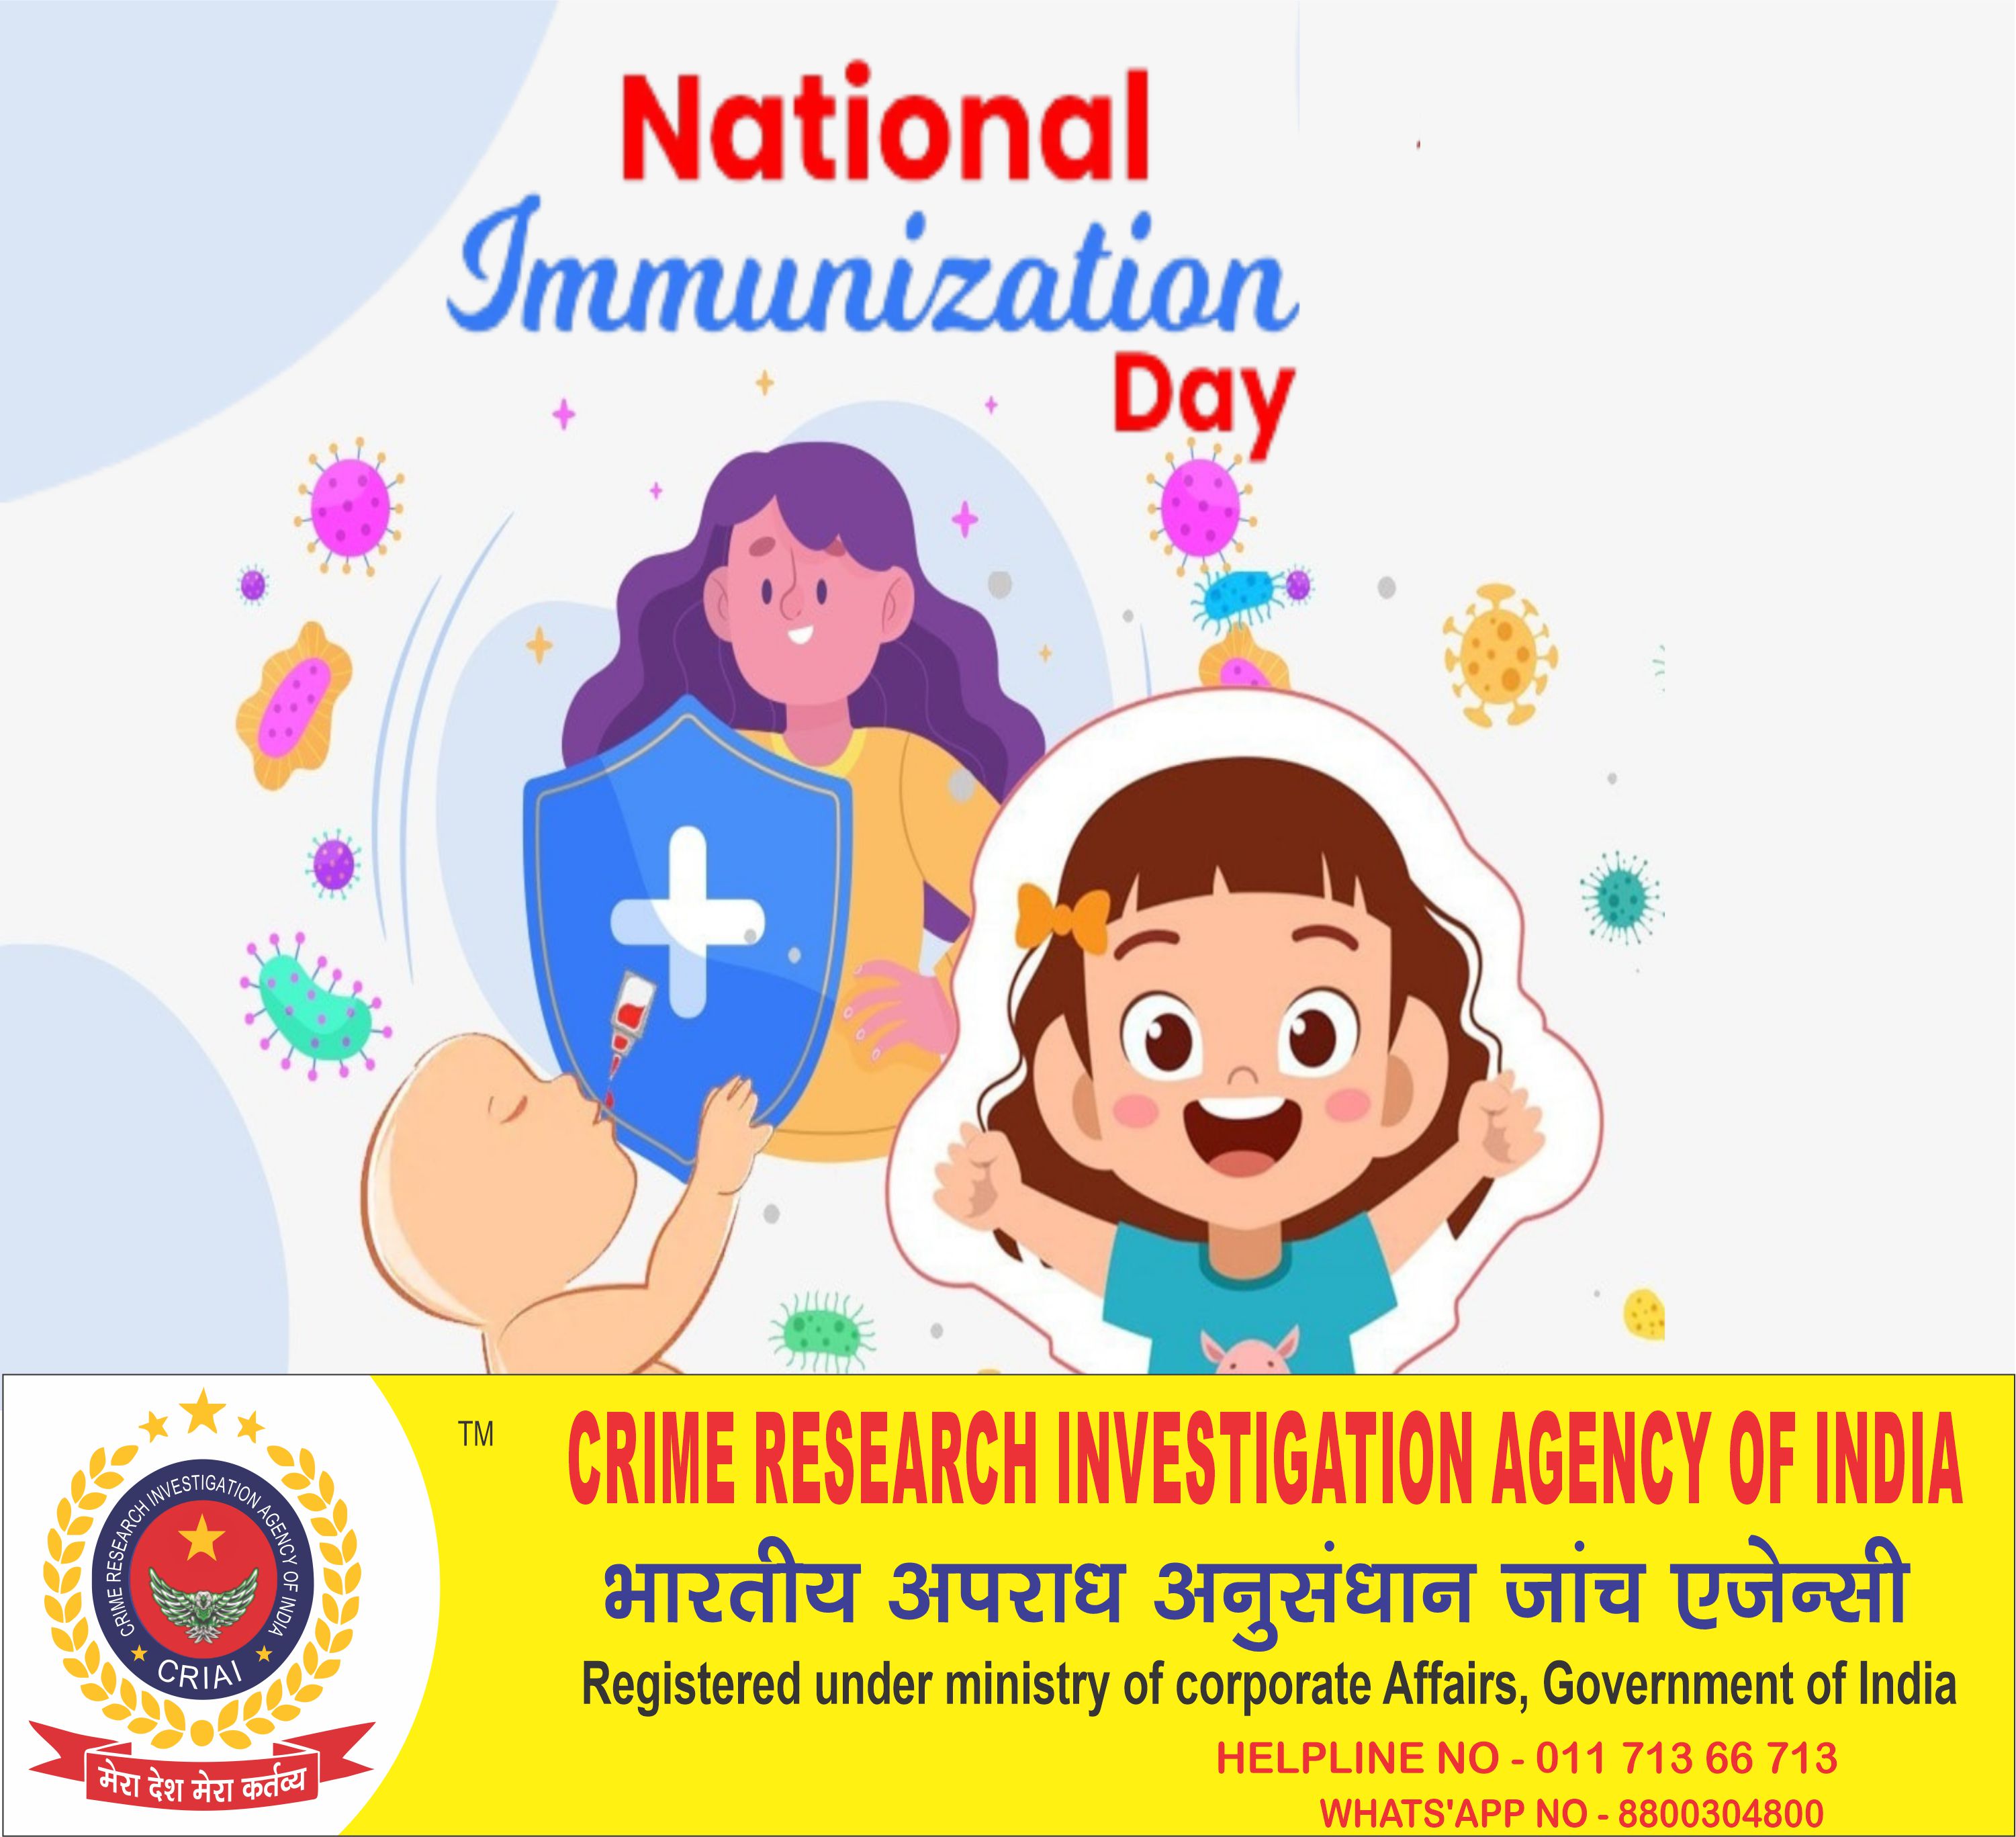 come-national-immunization-day-honor-our-indian-scientists-who-invented-corona-vaccine-save-our-lives-happy-national-vaccination-day